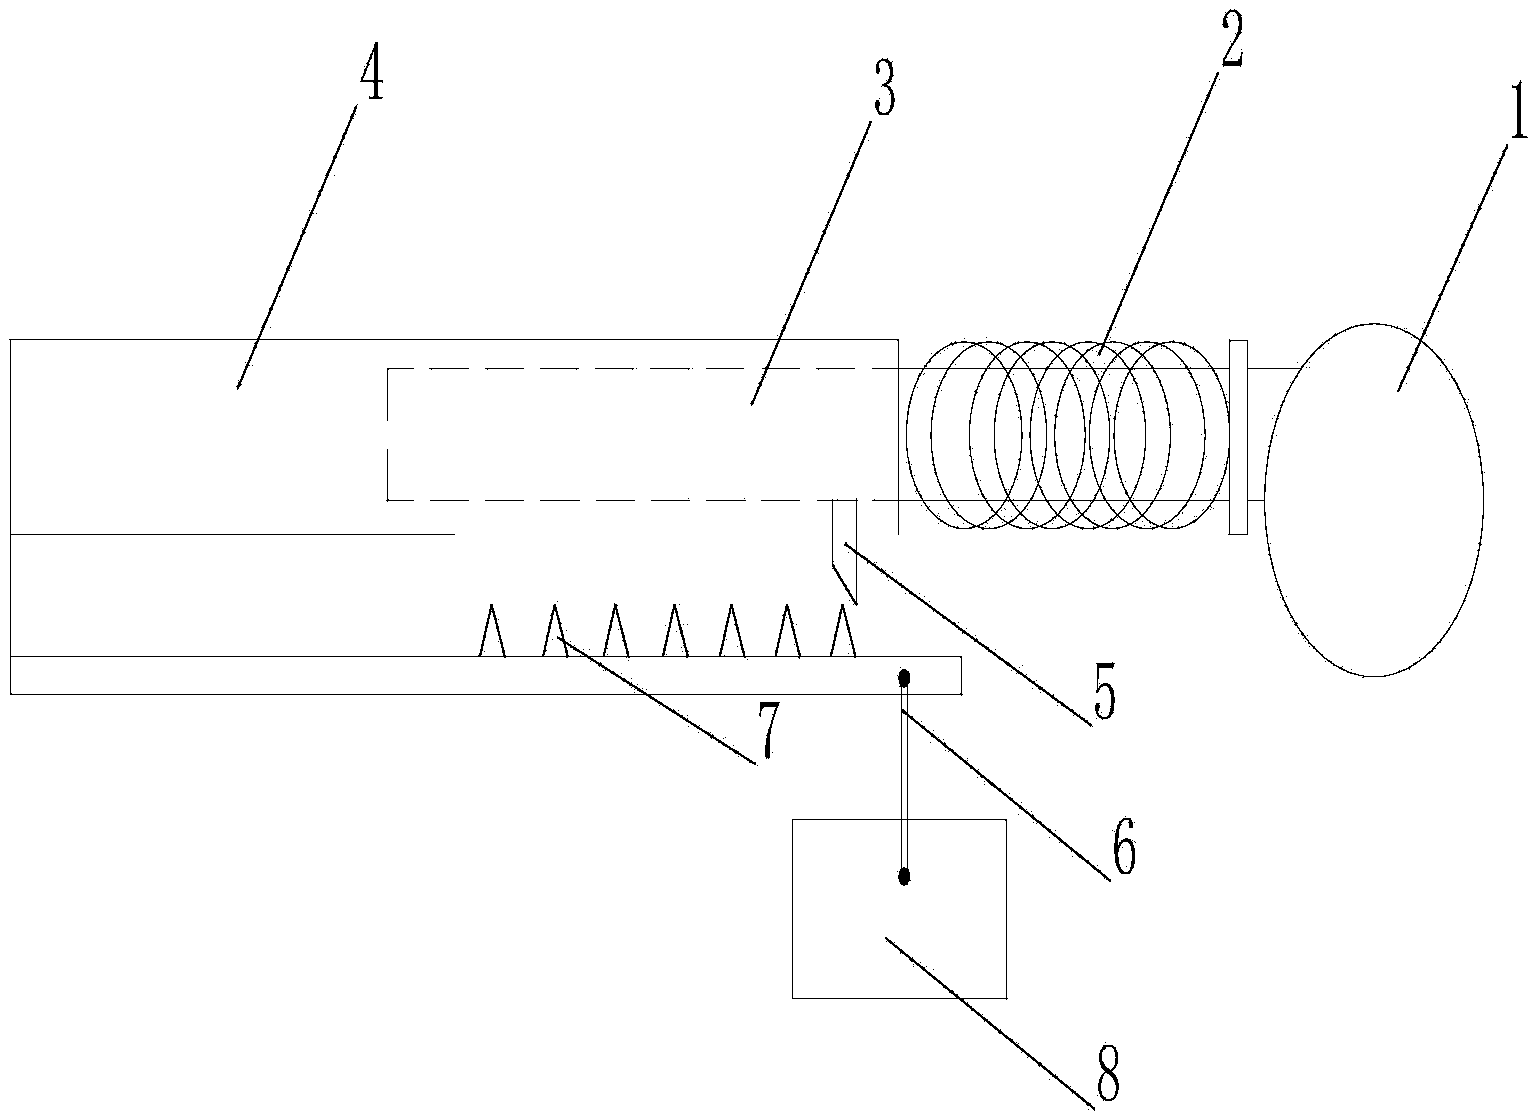 Ship buffering docking and unpowered sailing-off device